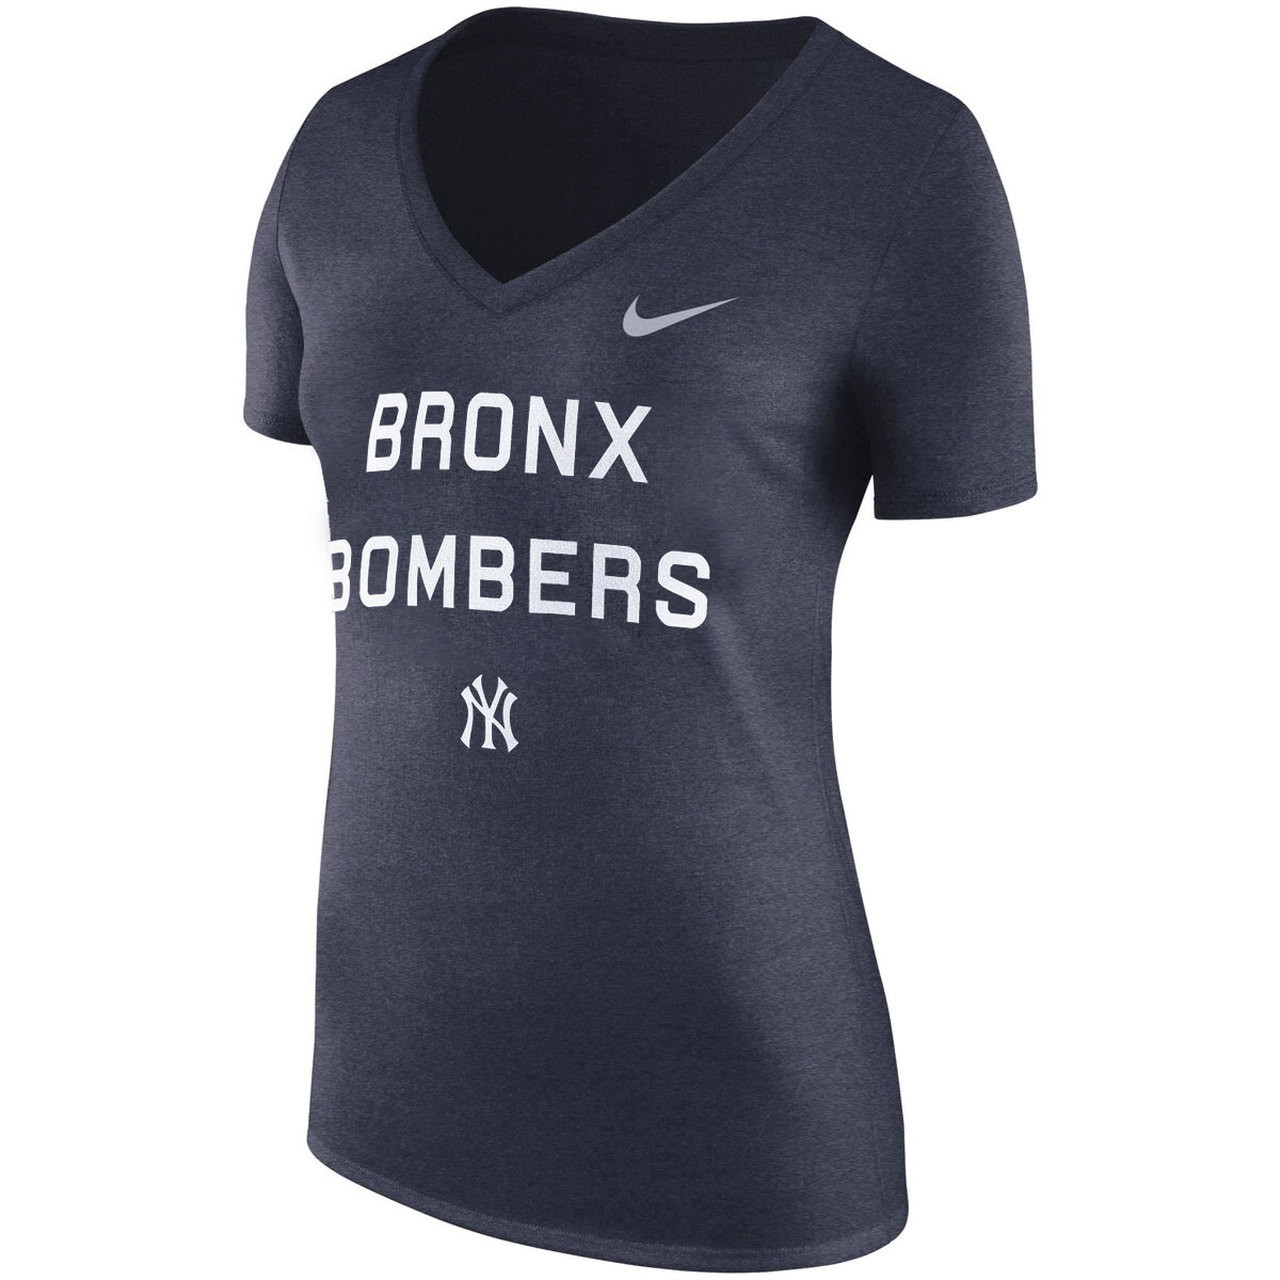 New York Yankees, Official Site of the Bronx Bombers